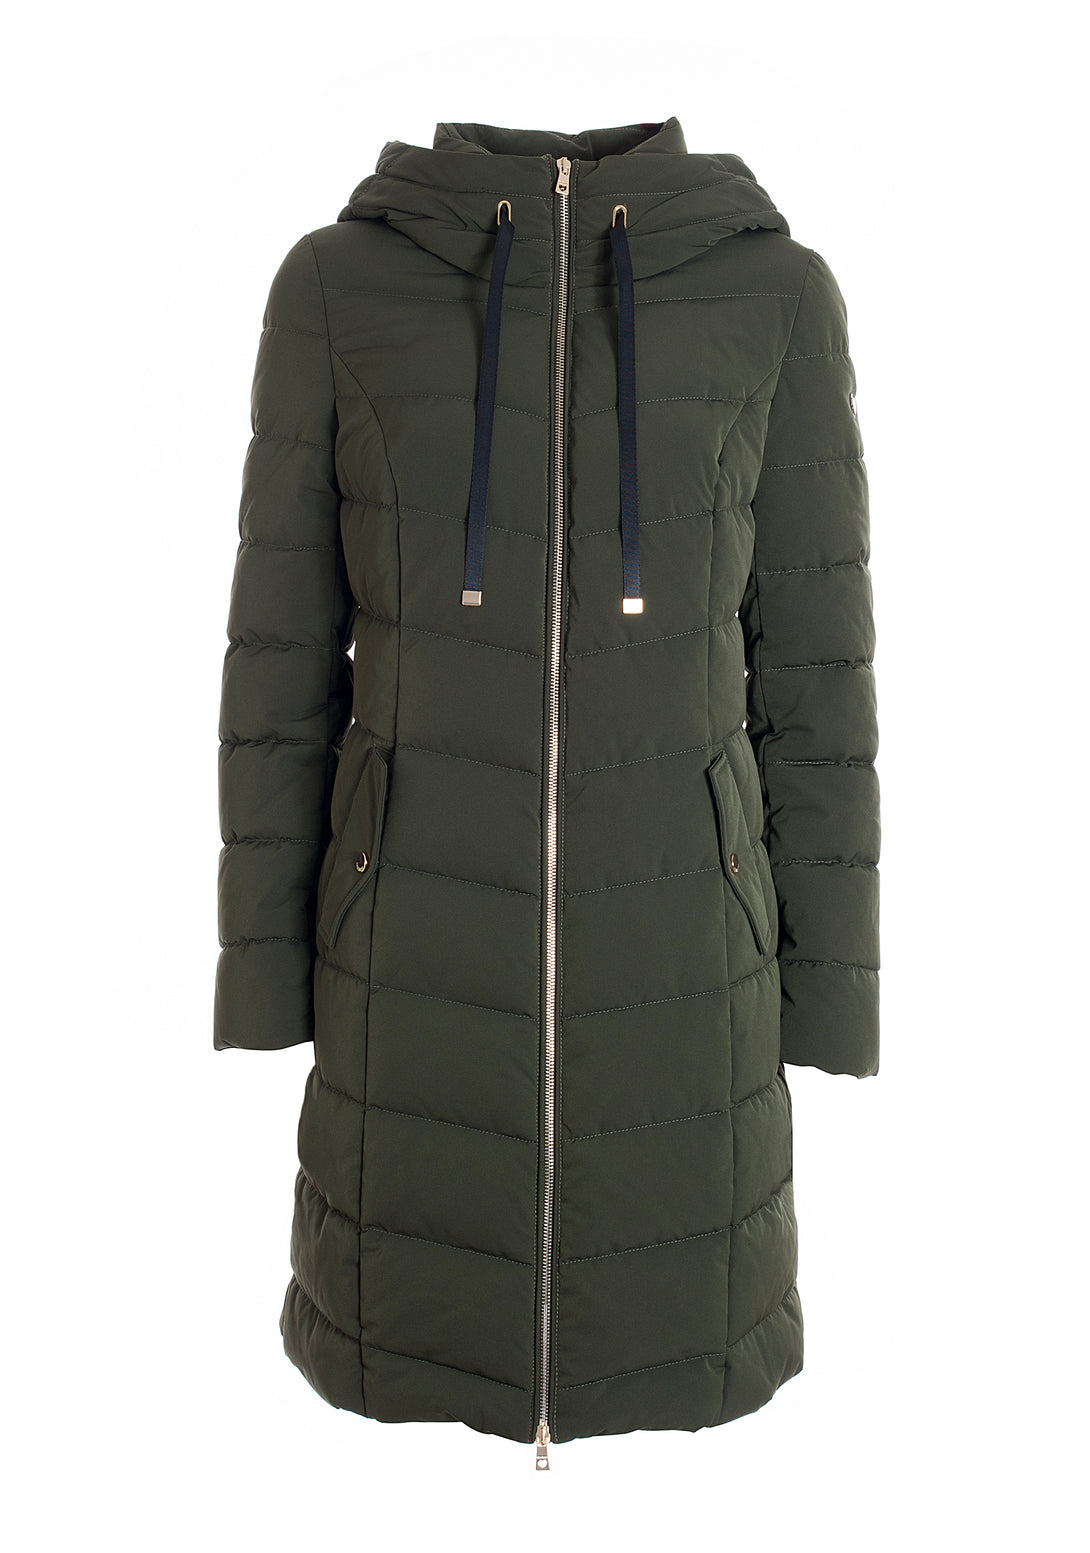 Padded jacket regular fit, long, made in quilted nylon